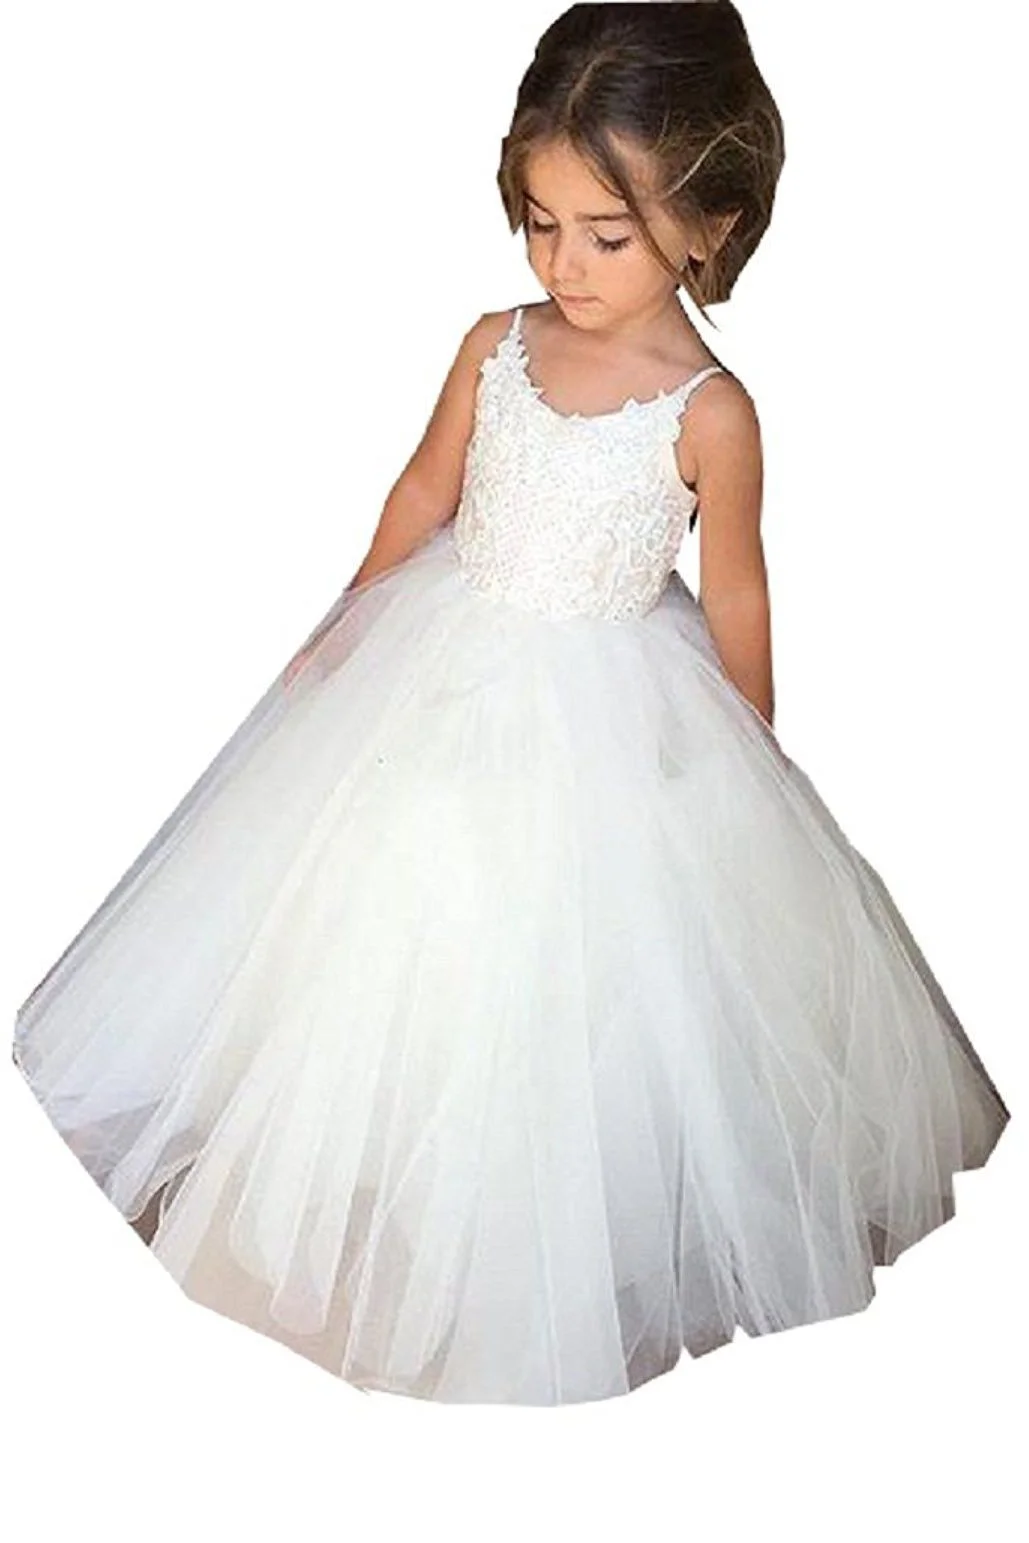 Daisda Square Neckline Sleeveless Ball Gown Flower Girl Dress Lace with Lace